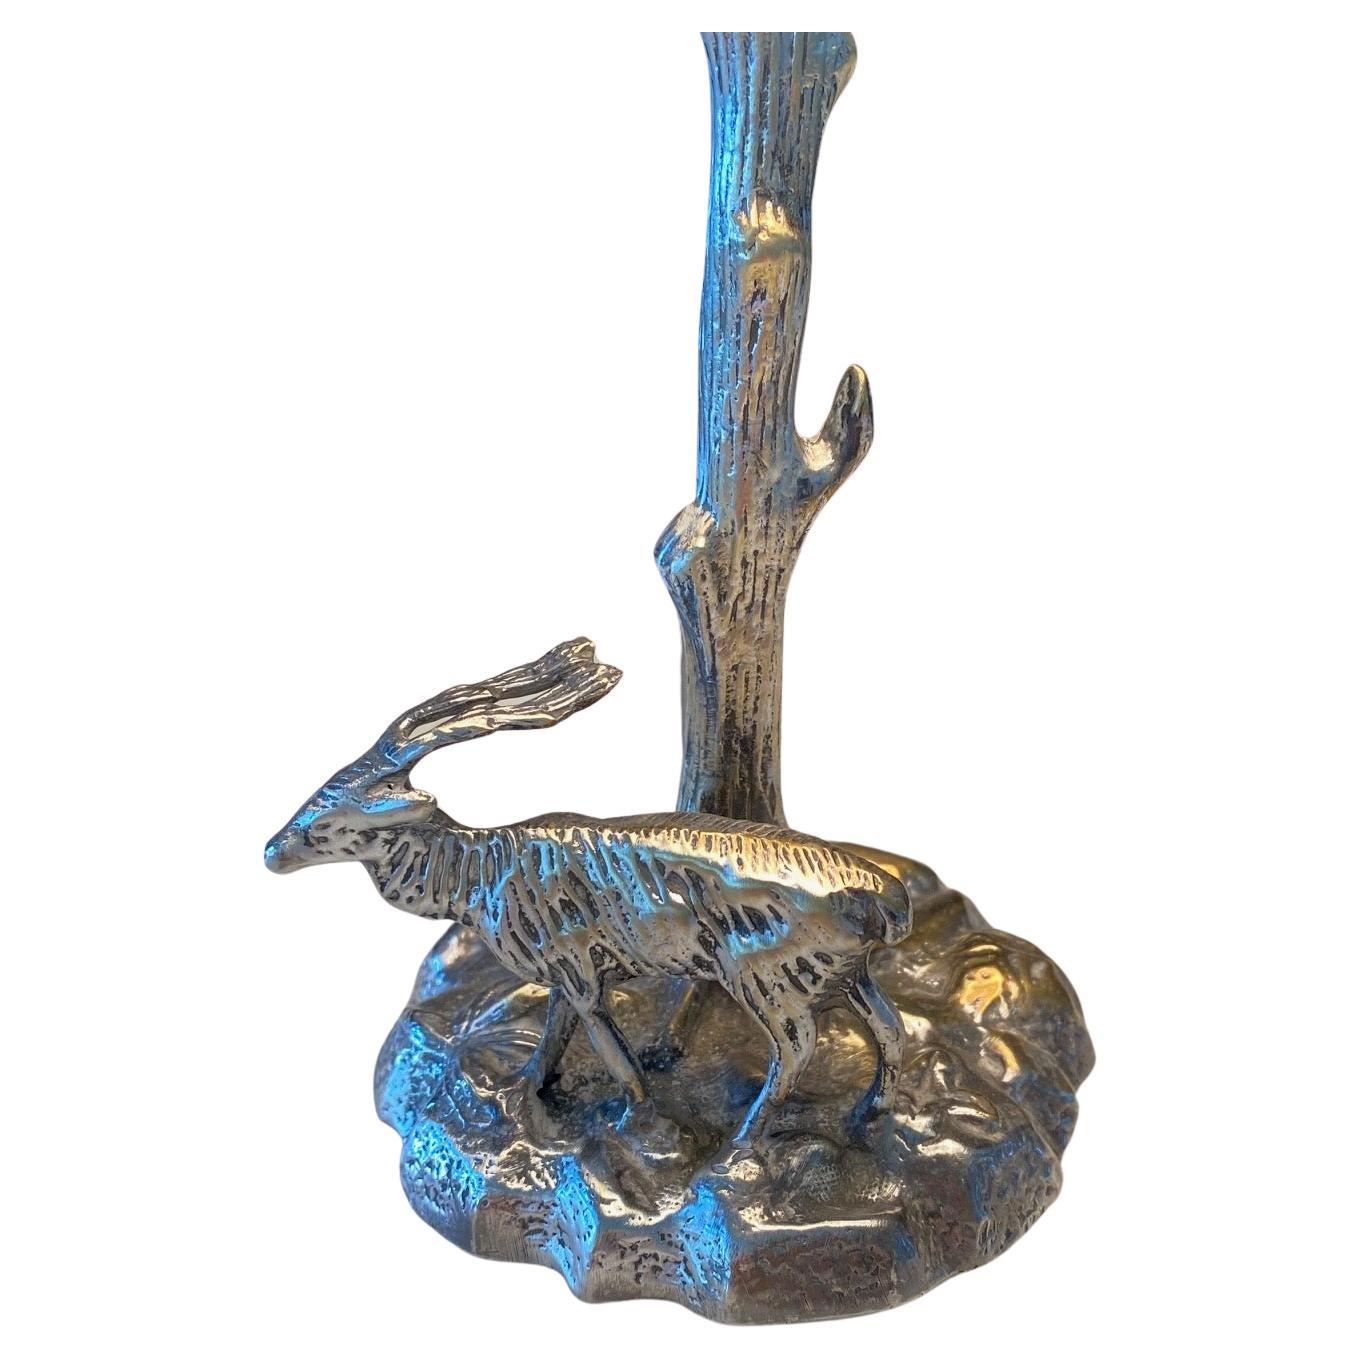 Valenti style stag or deer table lamp, unsigned. Fine midcentury quality solid silvered plate on bronze sculpture most likely by the highly sought after Spanish artist Valenti. This sculpture depicts a wild stag under a beautifully sculpted tree